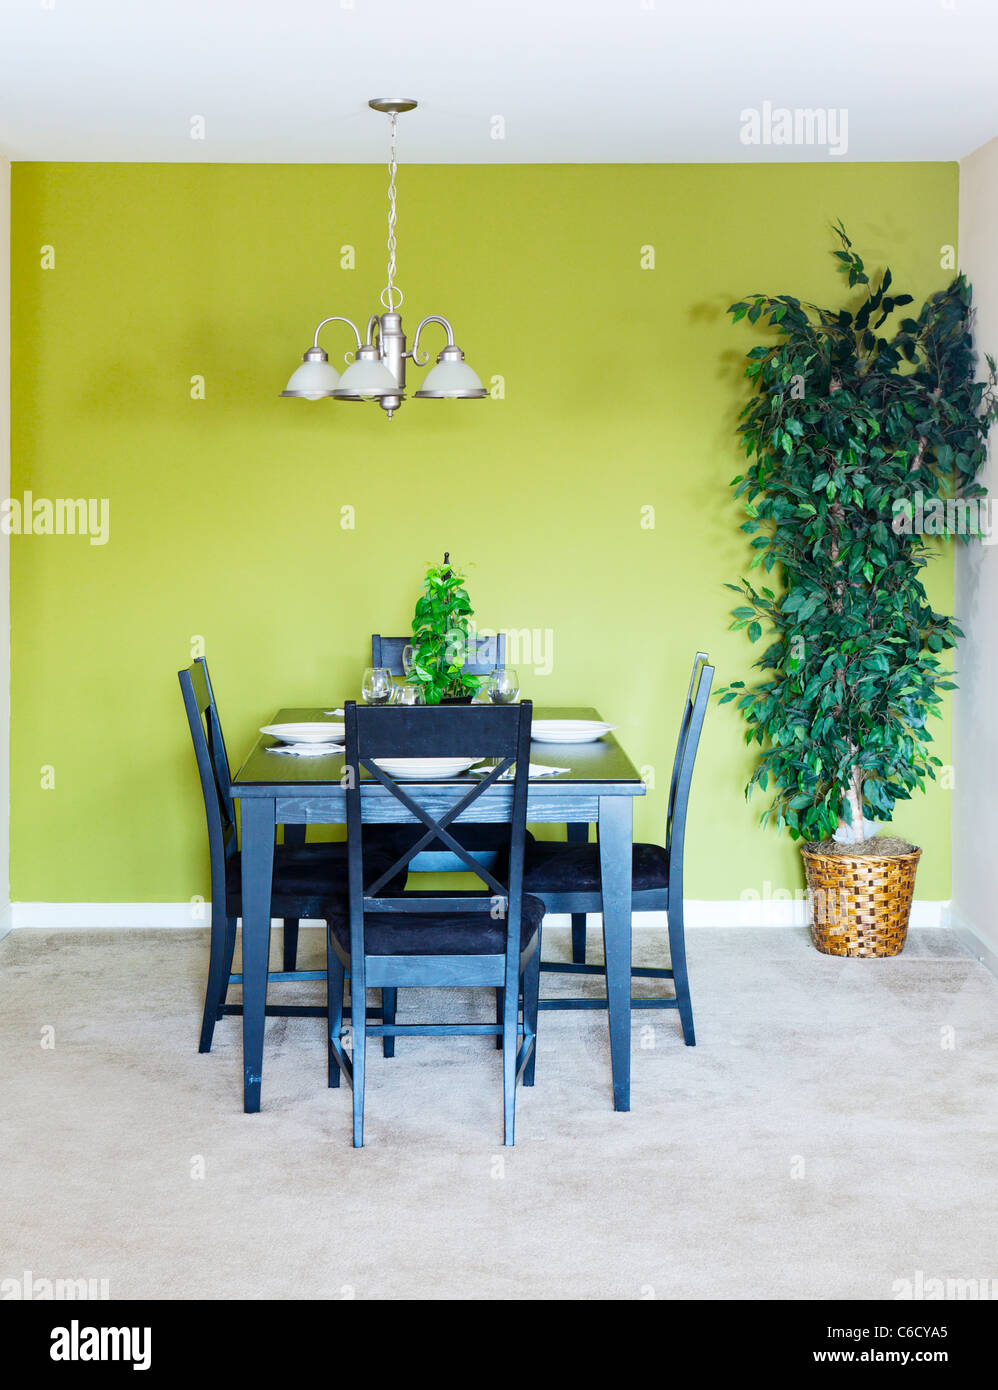 Dining area with black dining set and a tree Stock Photo